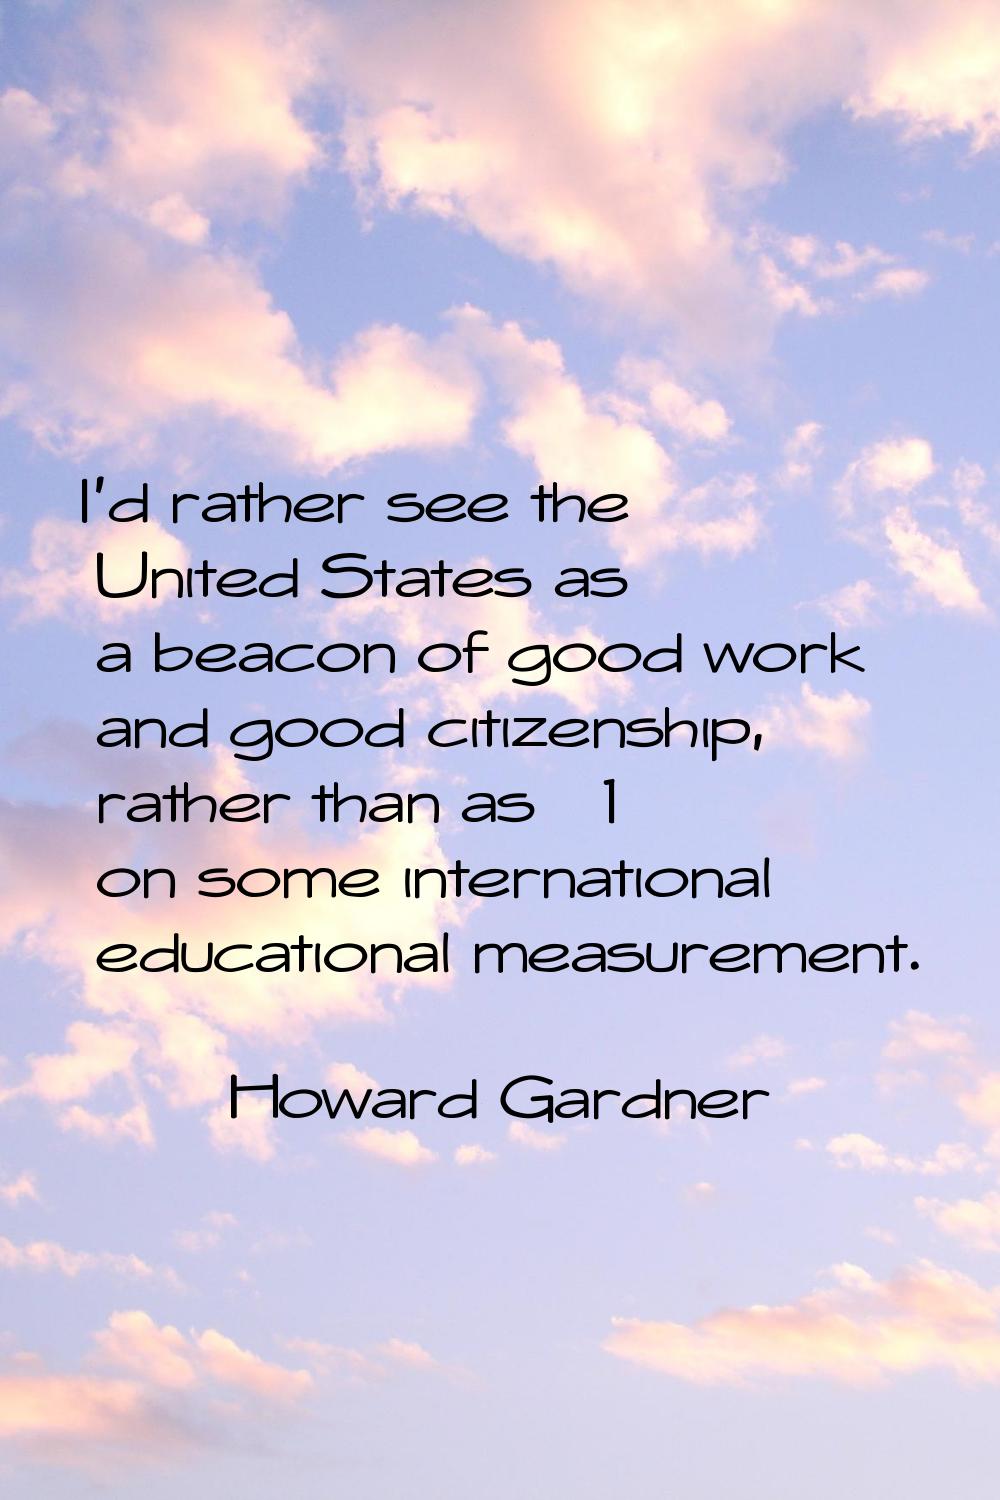 I'd rather see the United States as a beacon of good work and good citizenship, rather than as #1 o